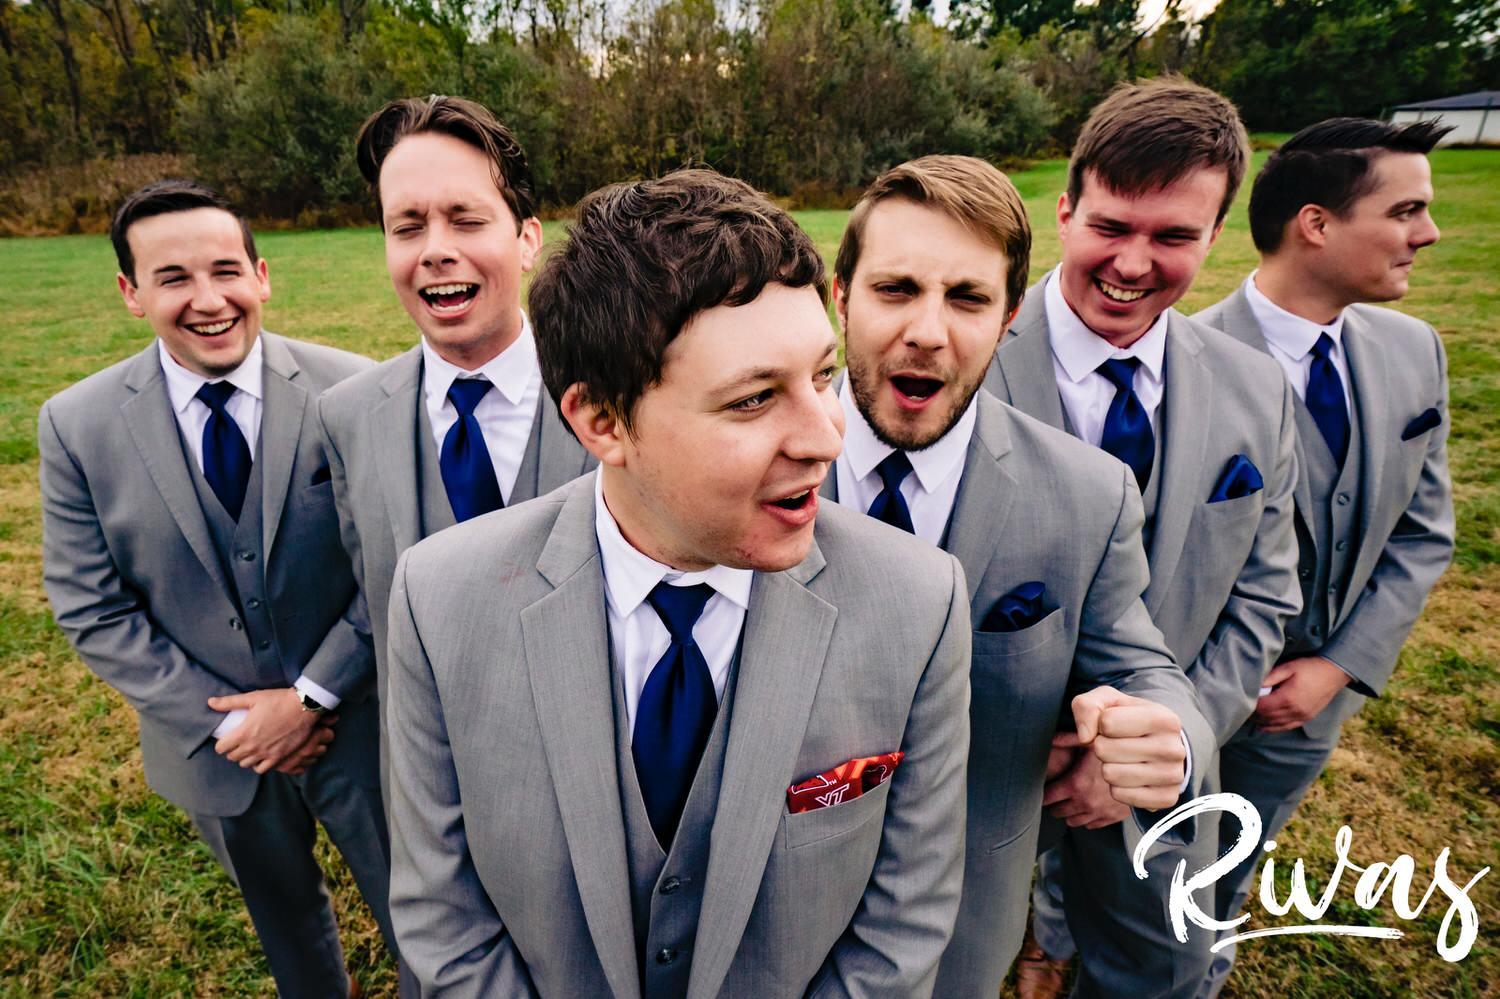 A colorful, candid picture of a groom and his groomsmen standing together laughing on the afternoon of his fall wedding at The Barns at Hamilton Station Vineyard. 